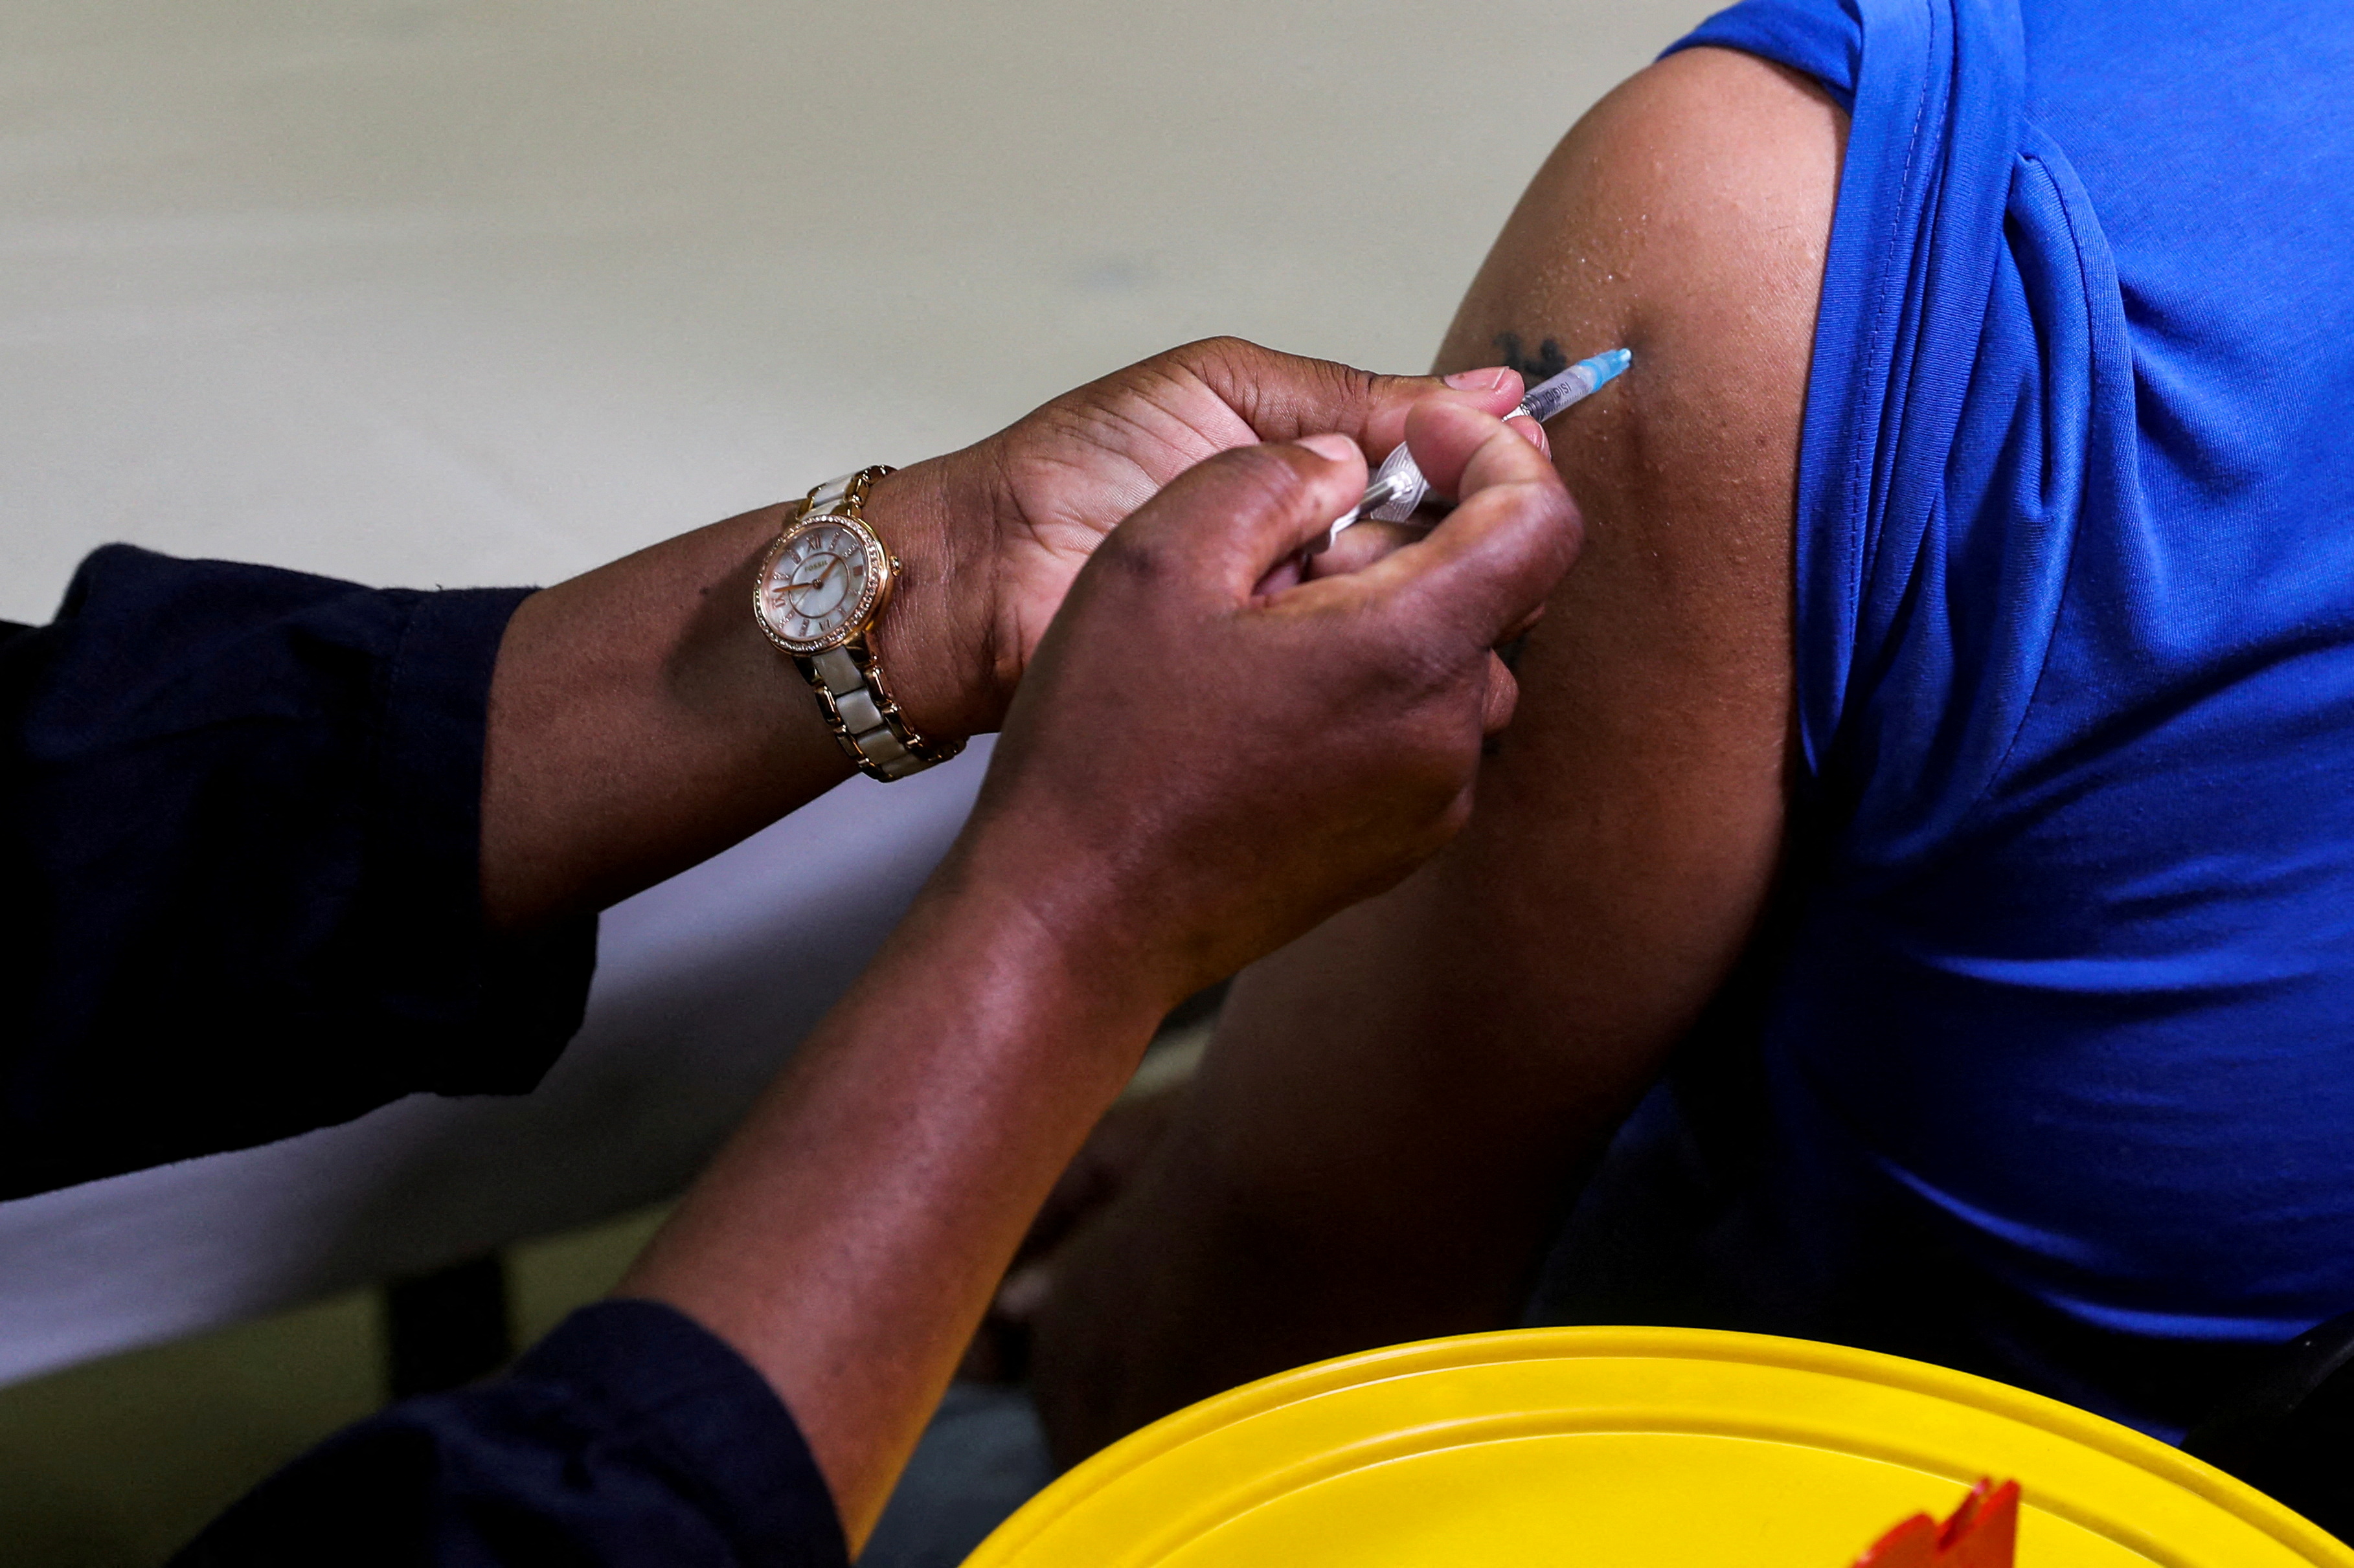 A healthcare worker administers the Pfizer COVID-19) vaccine to a man in Johannesburg